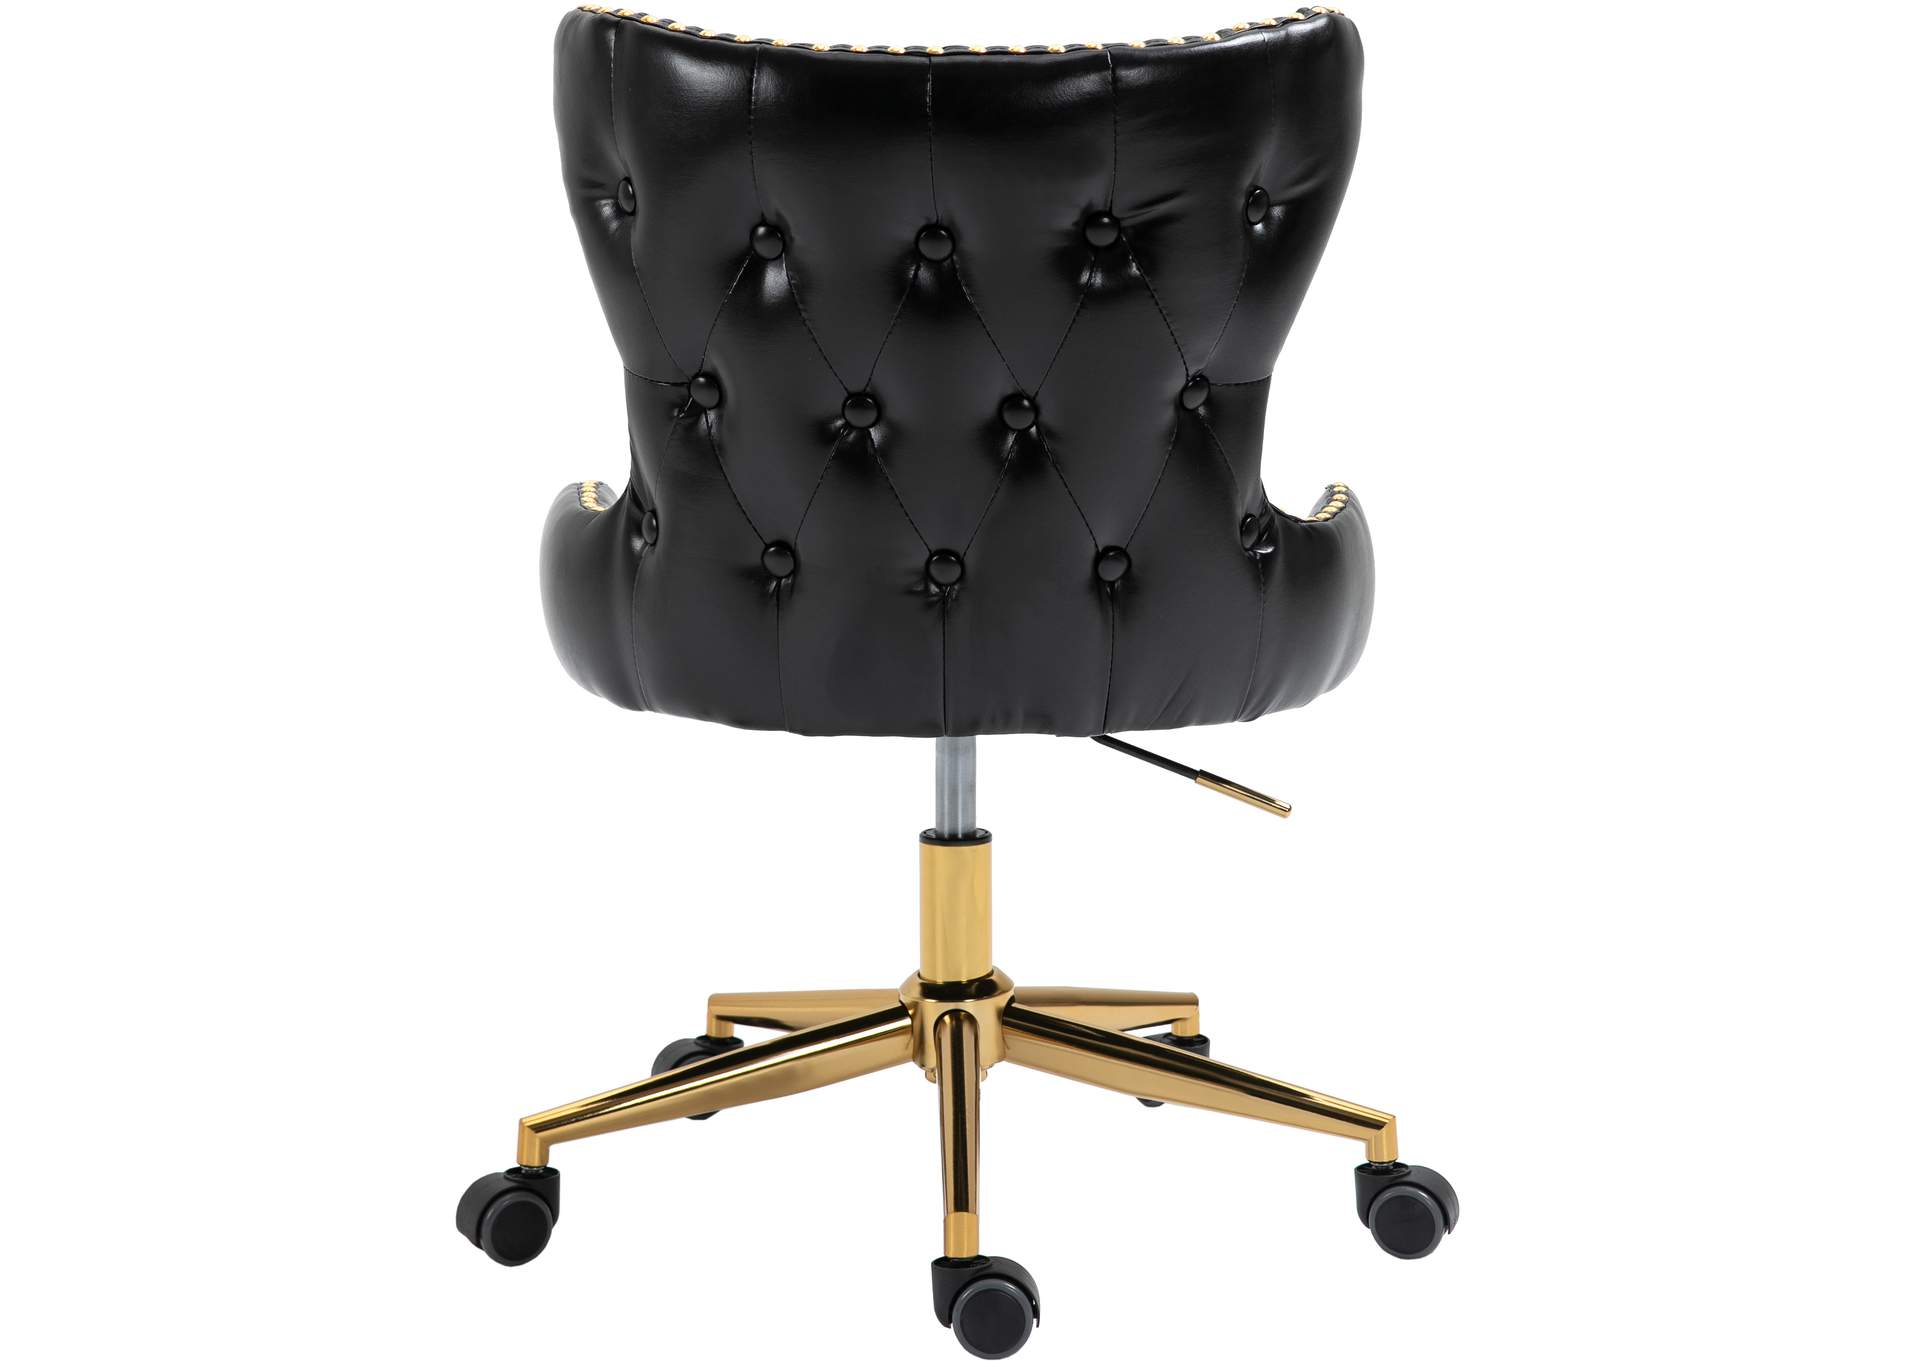 Hendrix Black Faux Leather Office Chair,Meridian Furniture